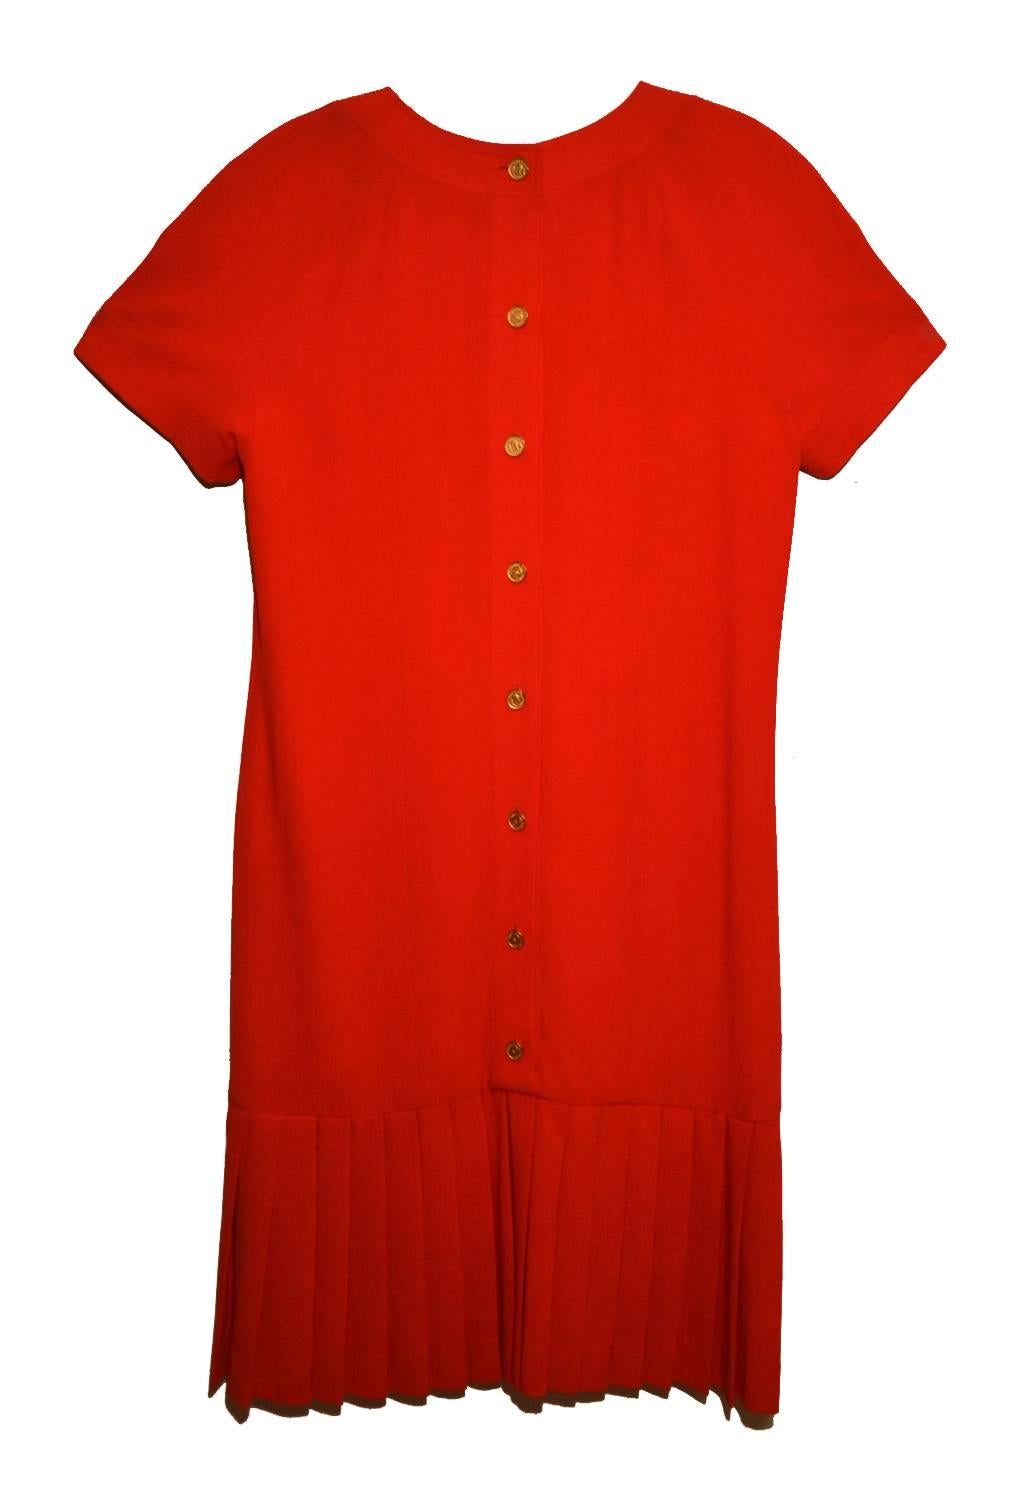 Rib weave, rayon blend dress.  Dress has four front pockets with Chanel button and 11